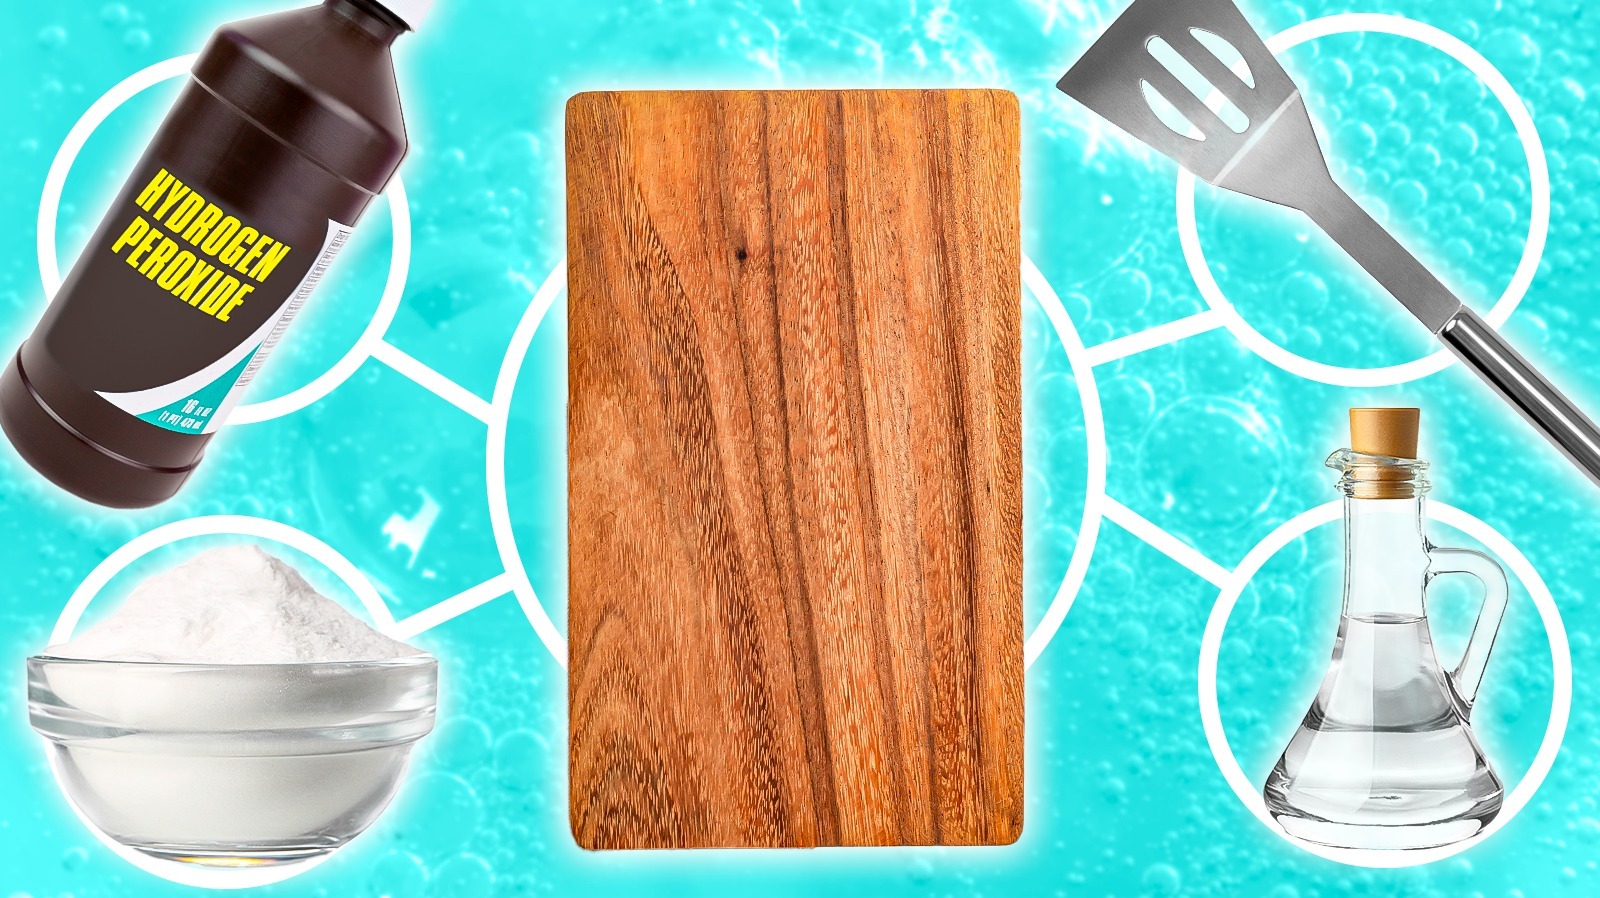 https://www.tastingtable.com/img/gallery/10-best-ways-to-keep-your-cutting-boards-clean/l-intro-1699556350.jpg